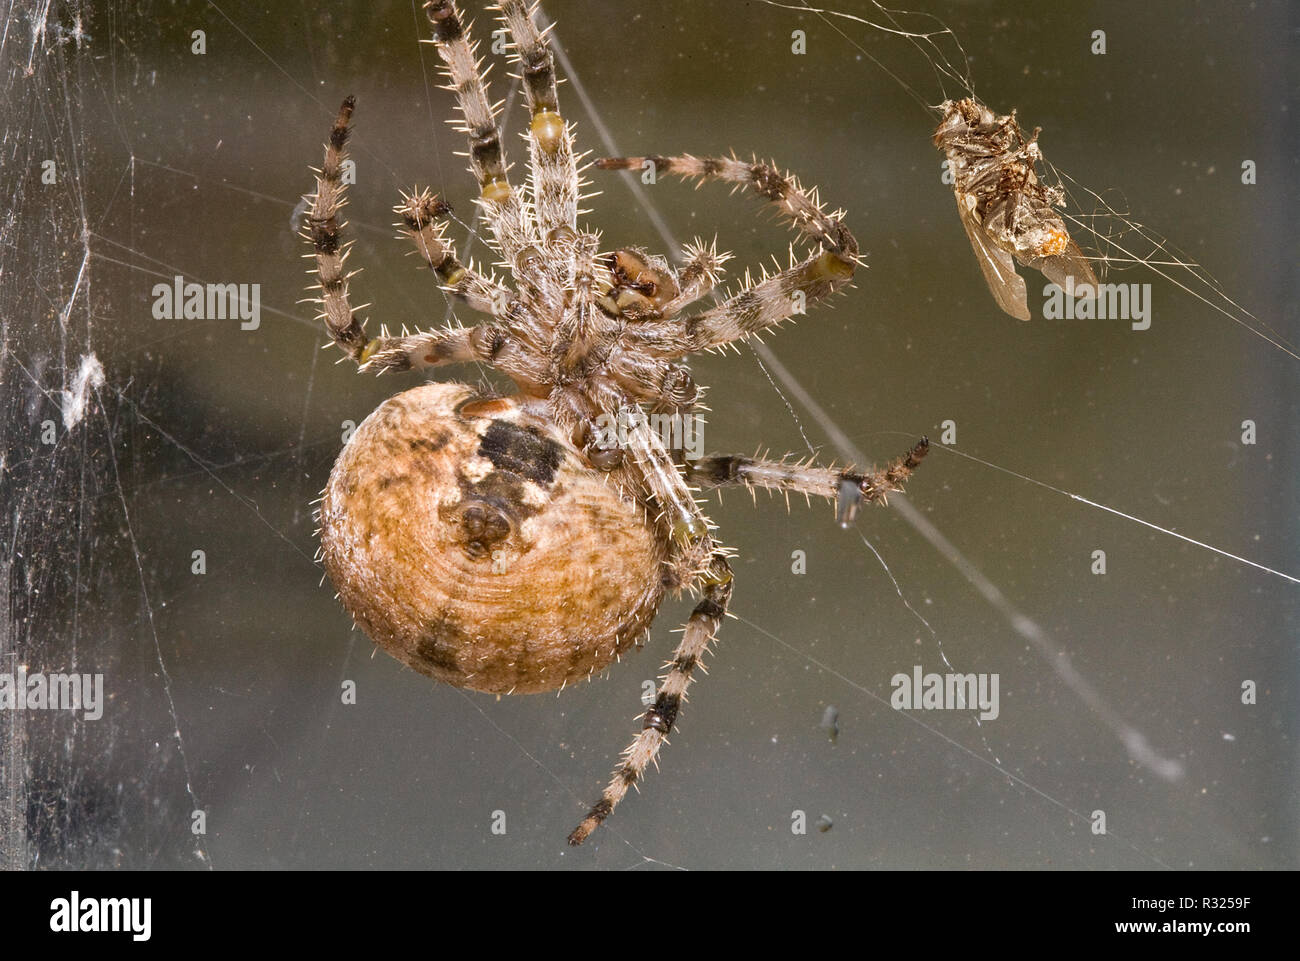 A large cross orbweaver spider, Araneus diadematus, hanging from strands of silk in its web as it approaches a green fly that is trapped in its web. Stock Photo